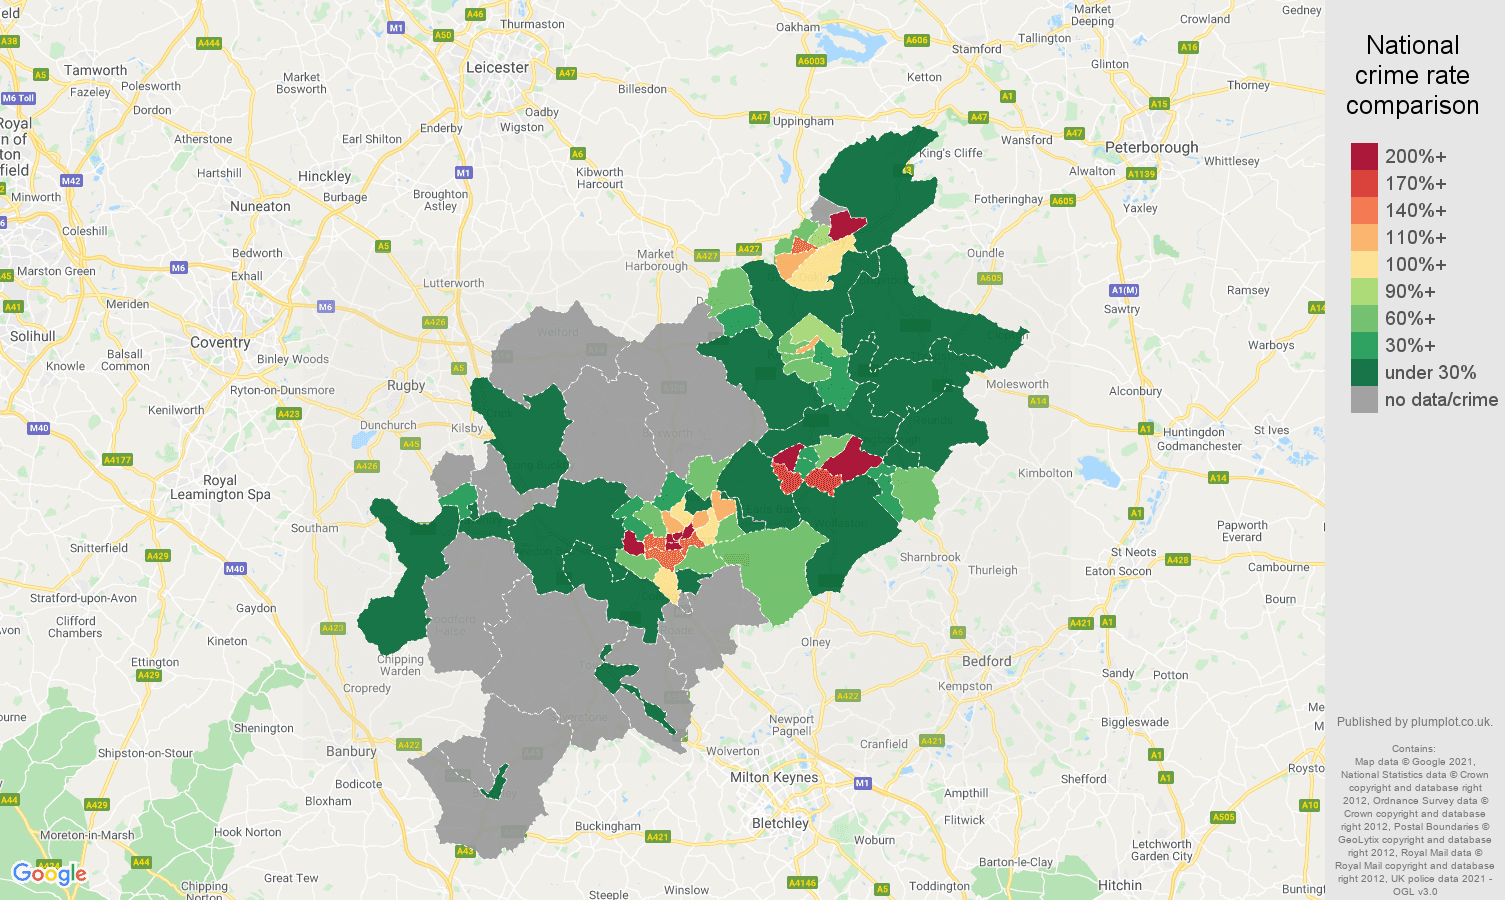 Northampton bicycle theft crime rate comparison map